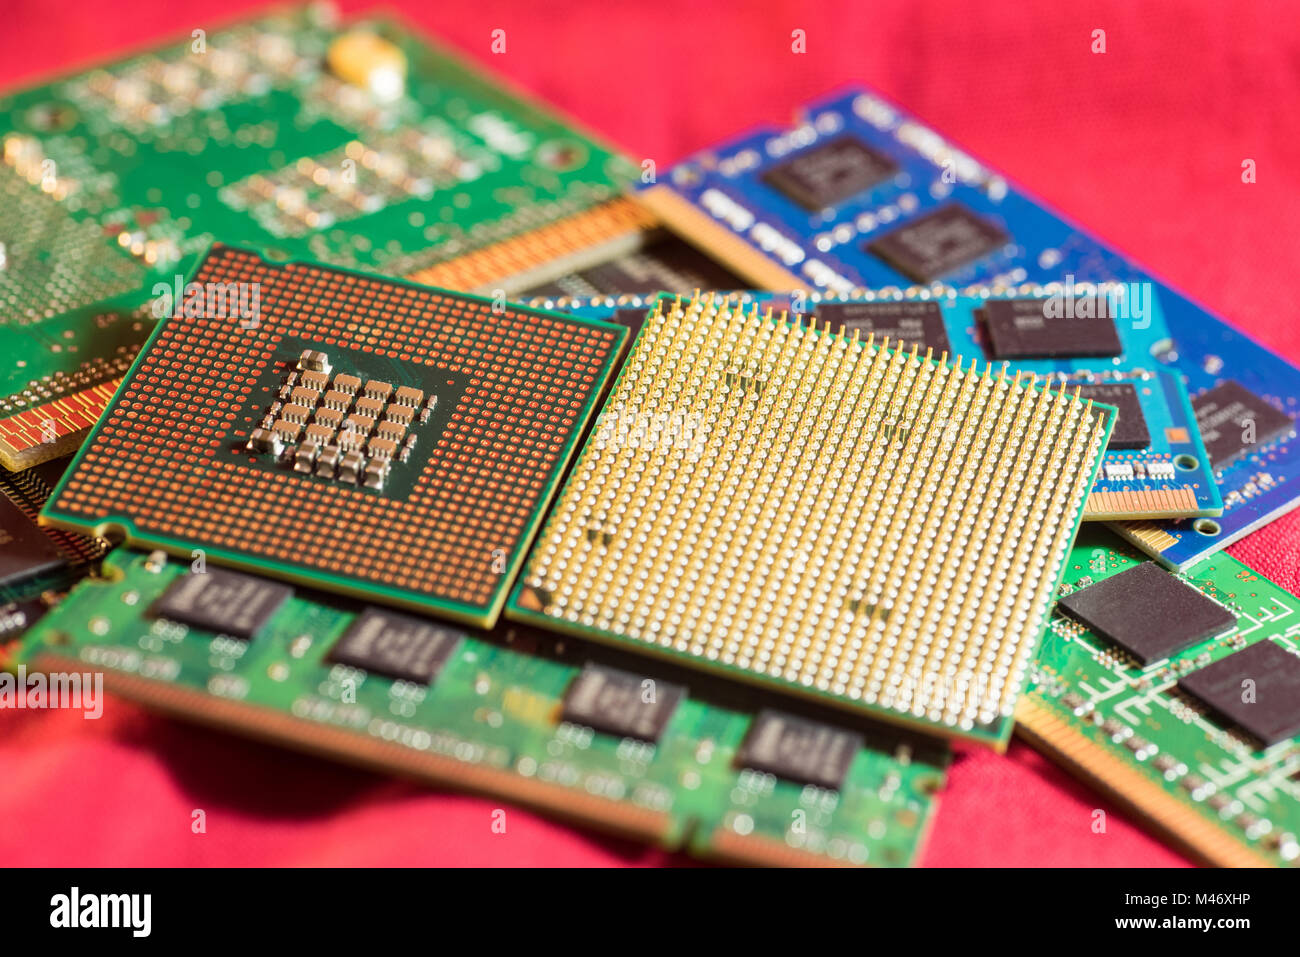 Two different types of CPUs on stacks of memory cards. Stock Photo